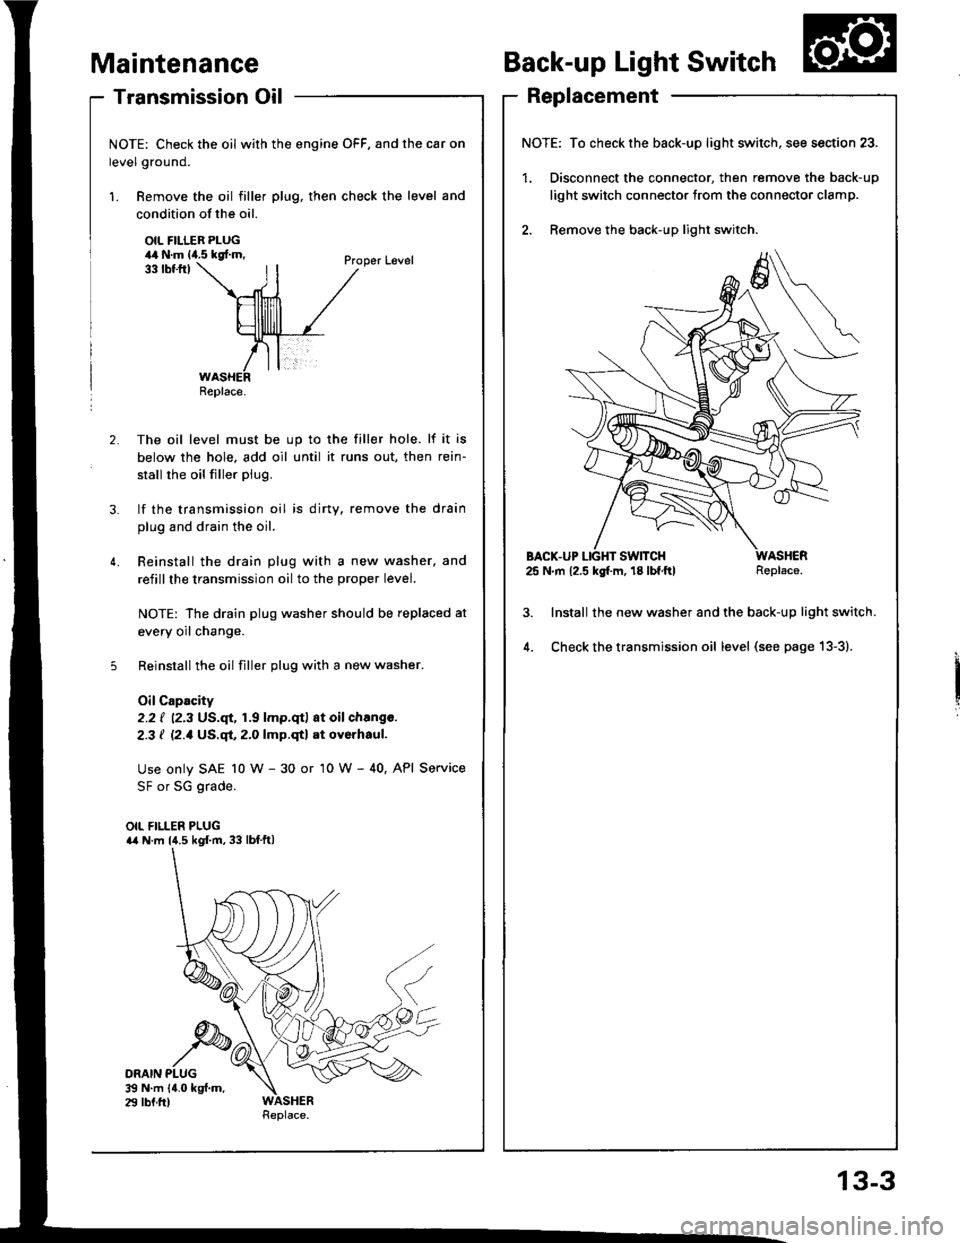 ACURA INTEGRA 1994  Service Repair Manual - Transmission Oil
NOTE: Check the oil with the engine OFF, and the car on
level ground.
1. Remove the oil filler plug, then check the level and
Maintenance
condition of the oil.
OIL FILLER PLUG44 N.m